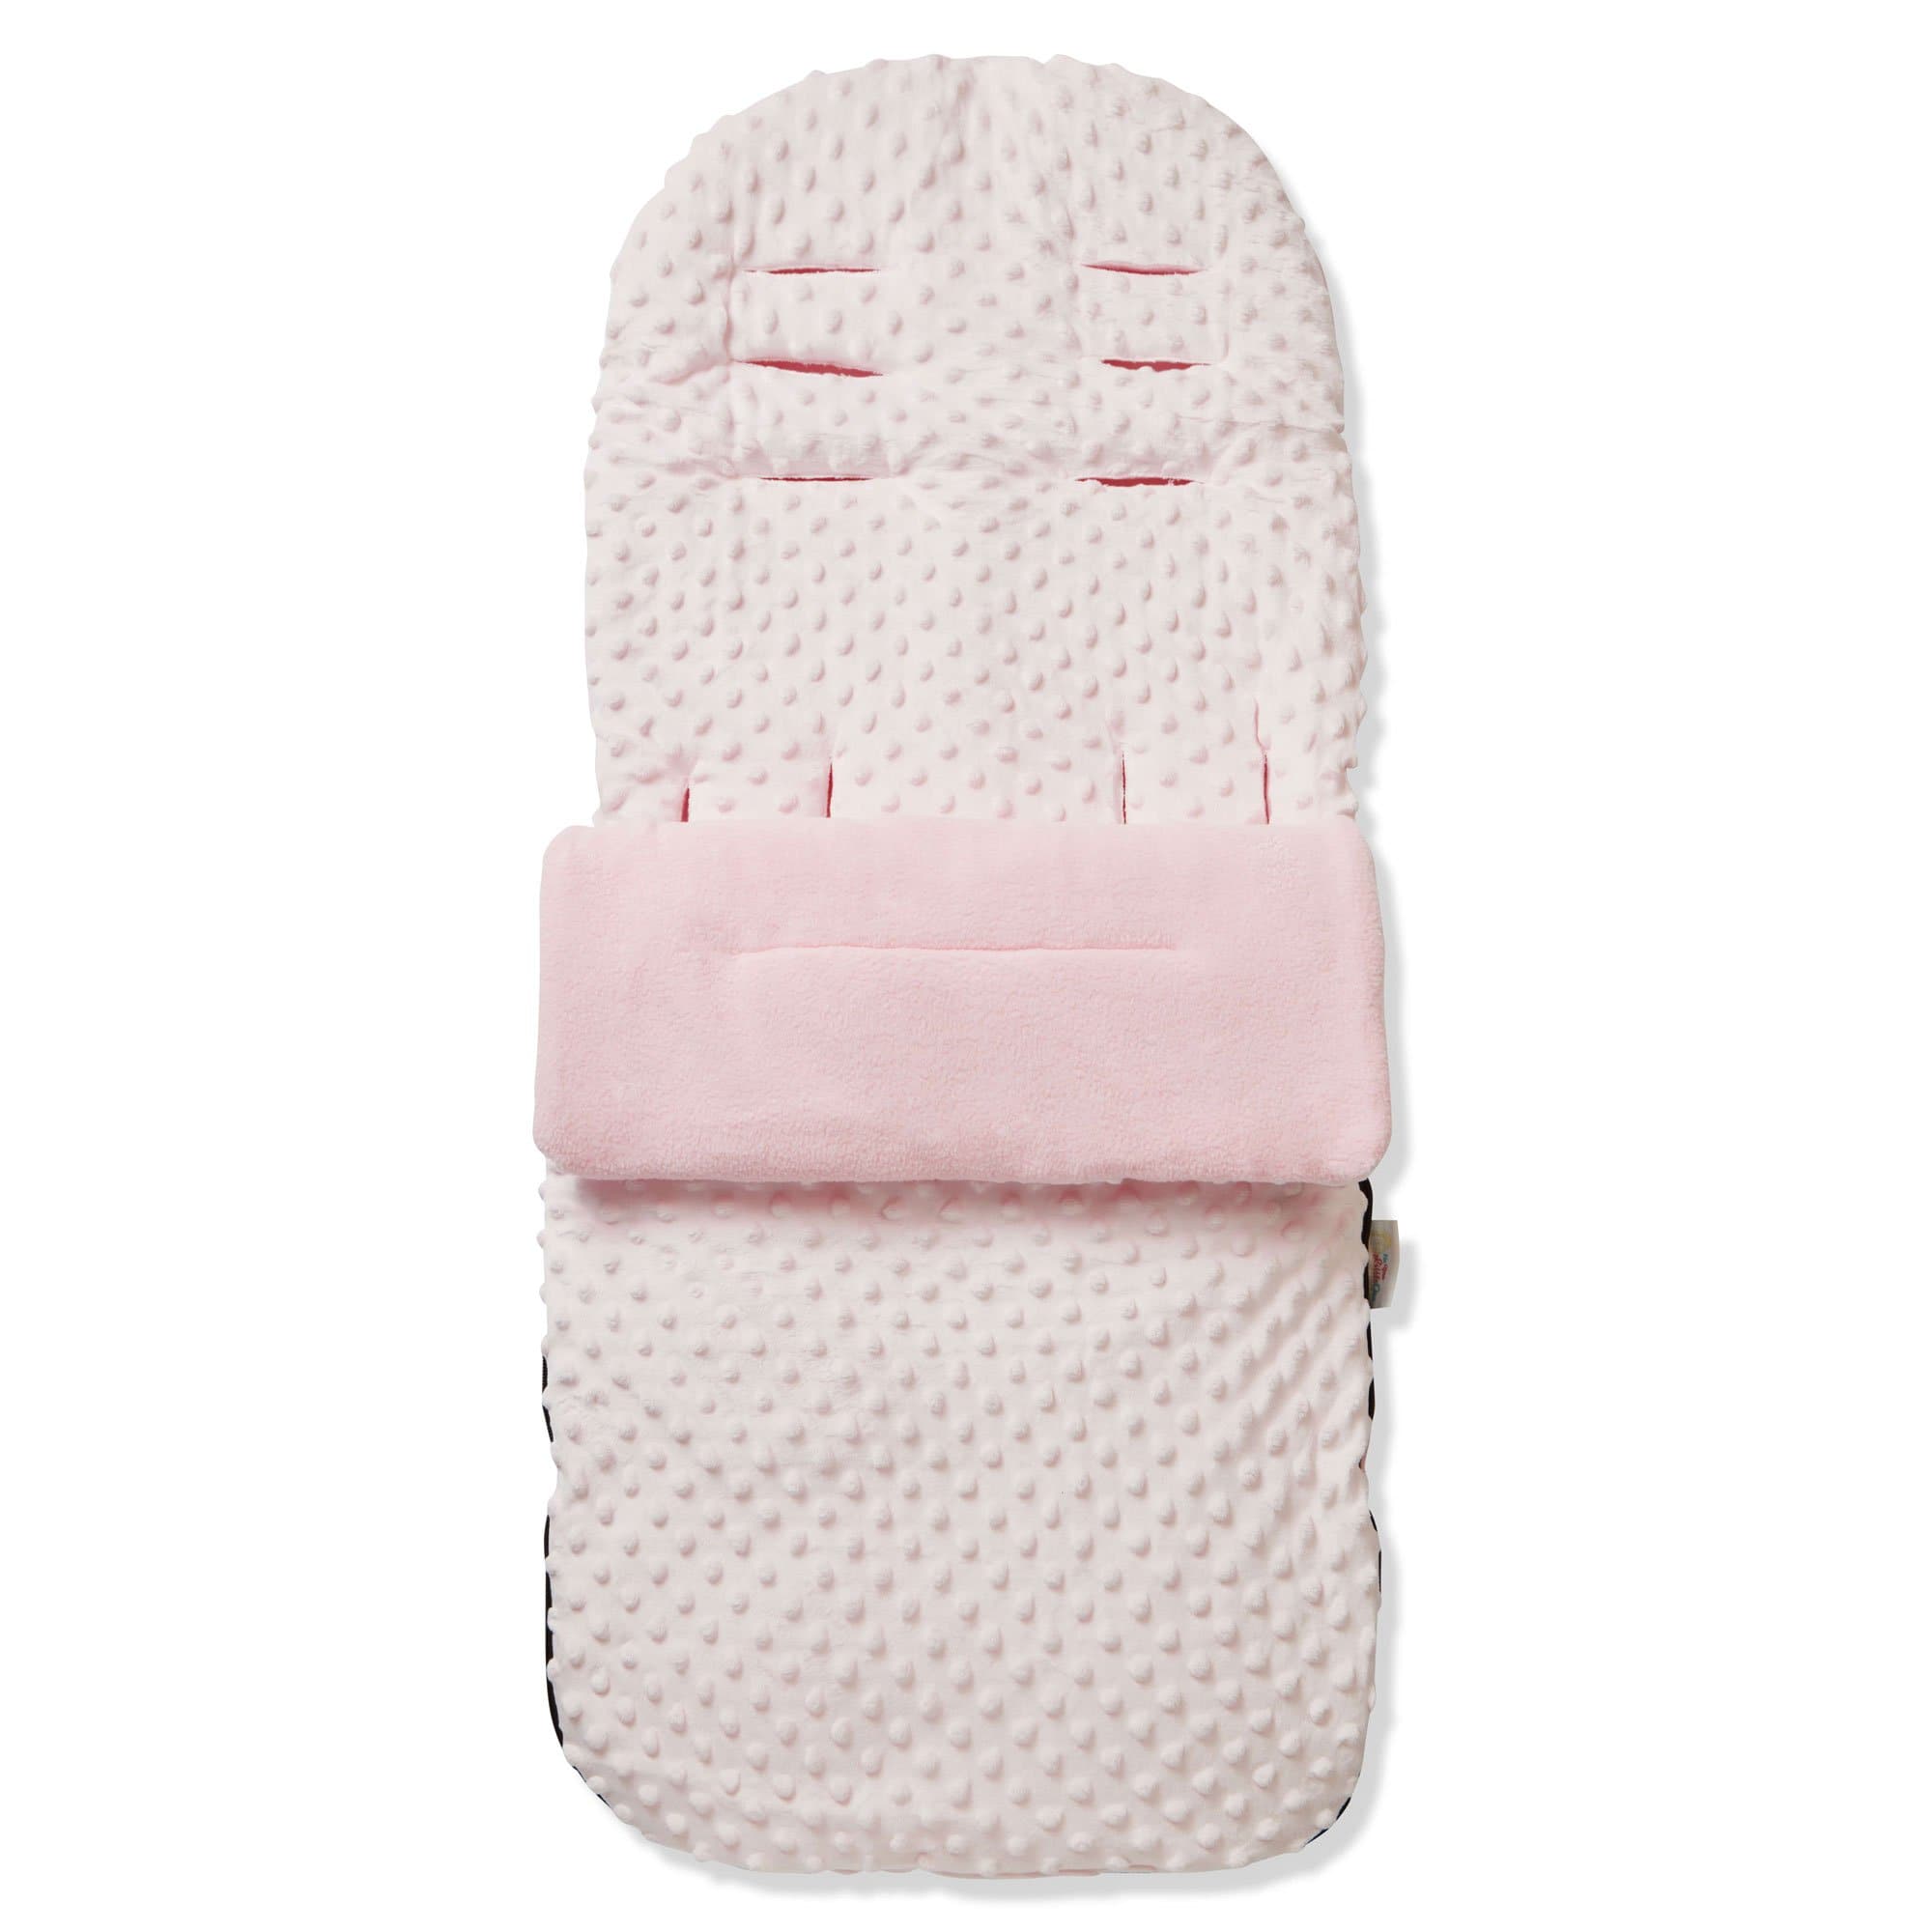 Dimple Footmuff / Cosy Toes Compatible with Silver Cross - Pink / Fits All Models | For Your Little One